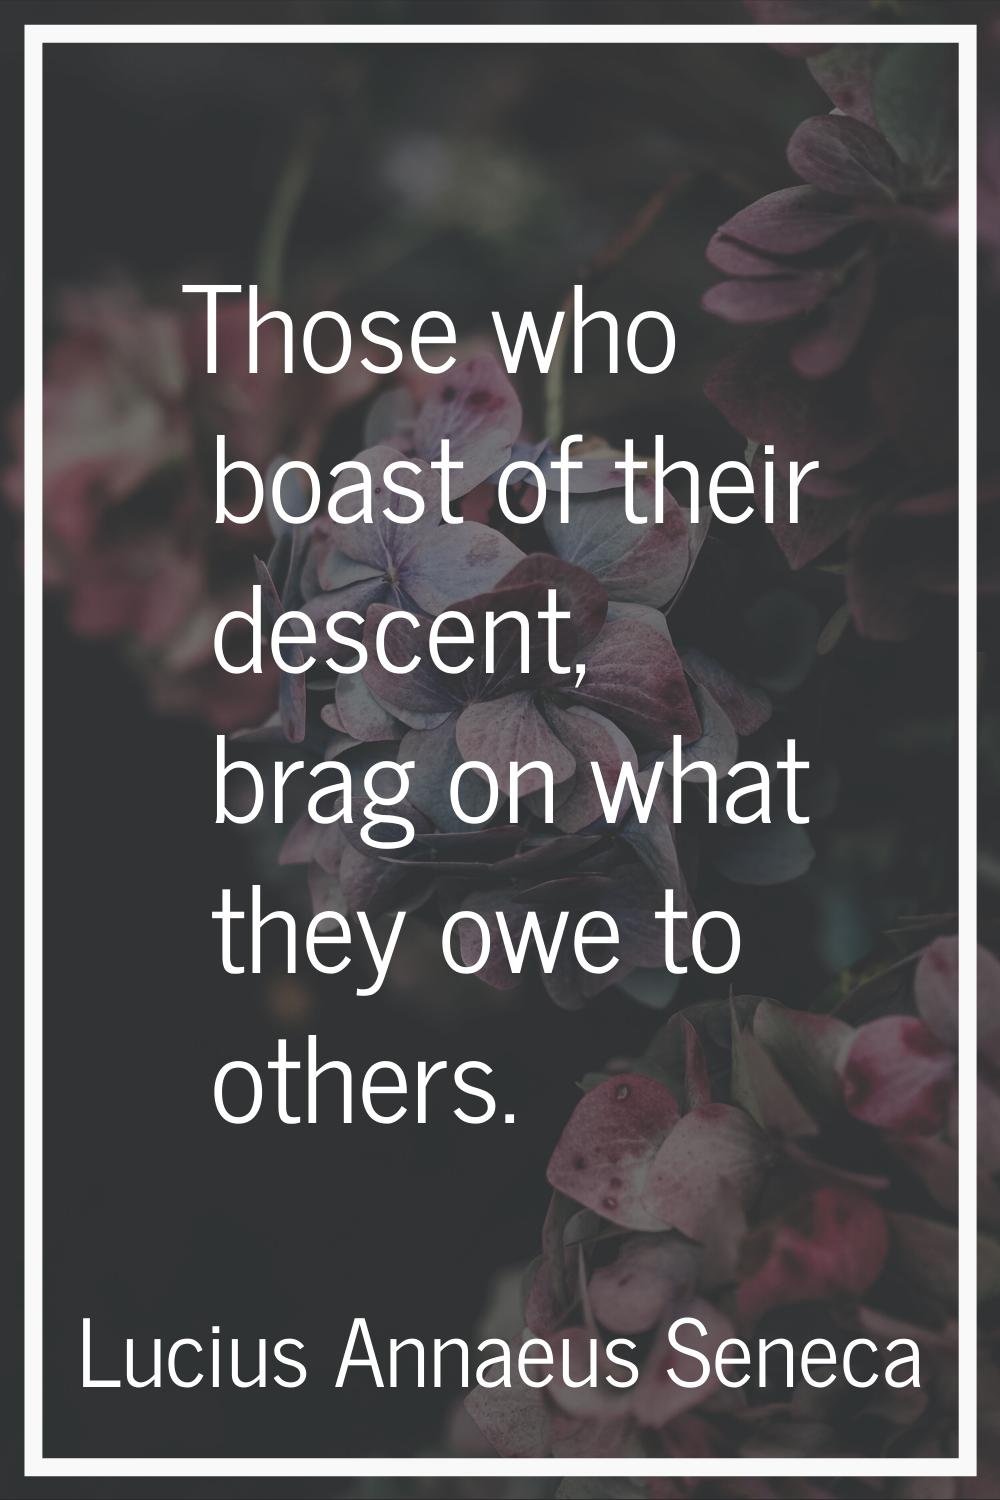 Those who boast of their descent, brag on what they owe to others.